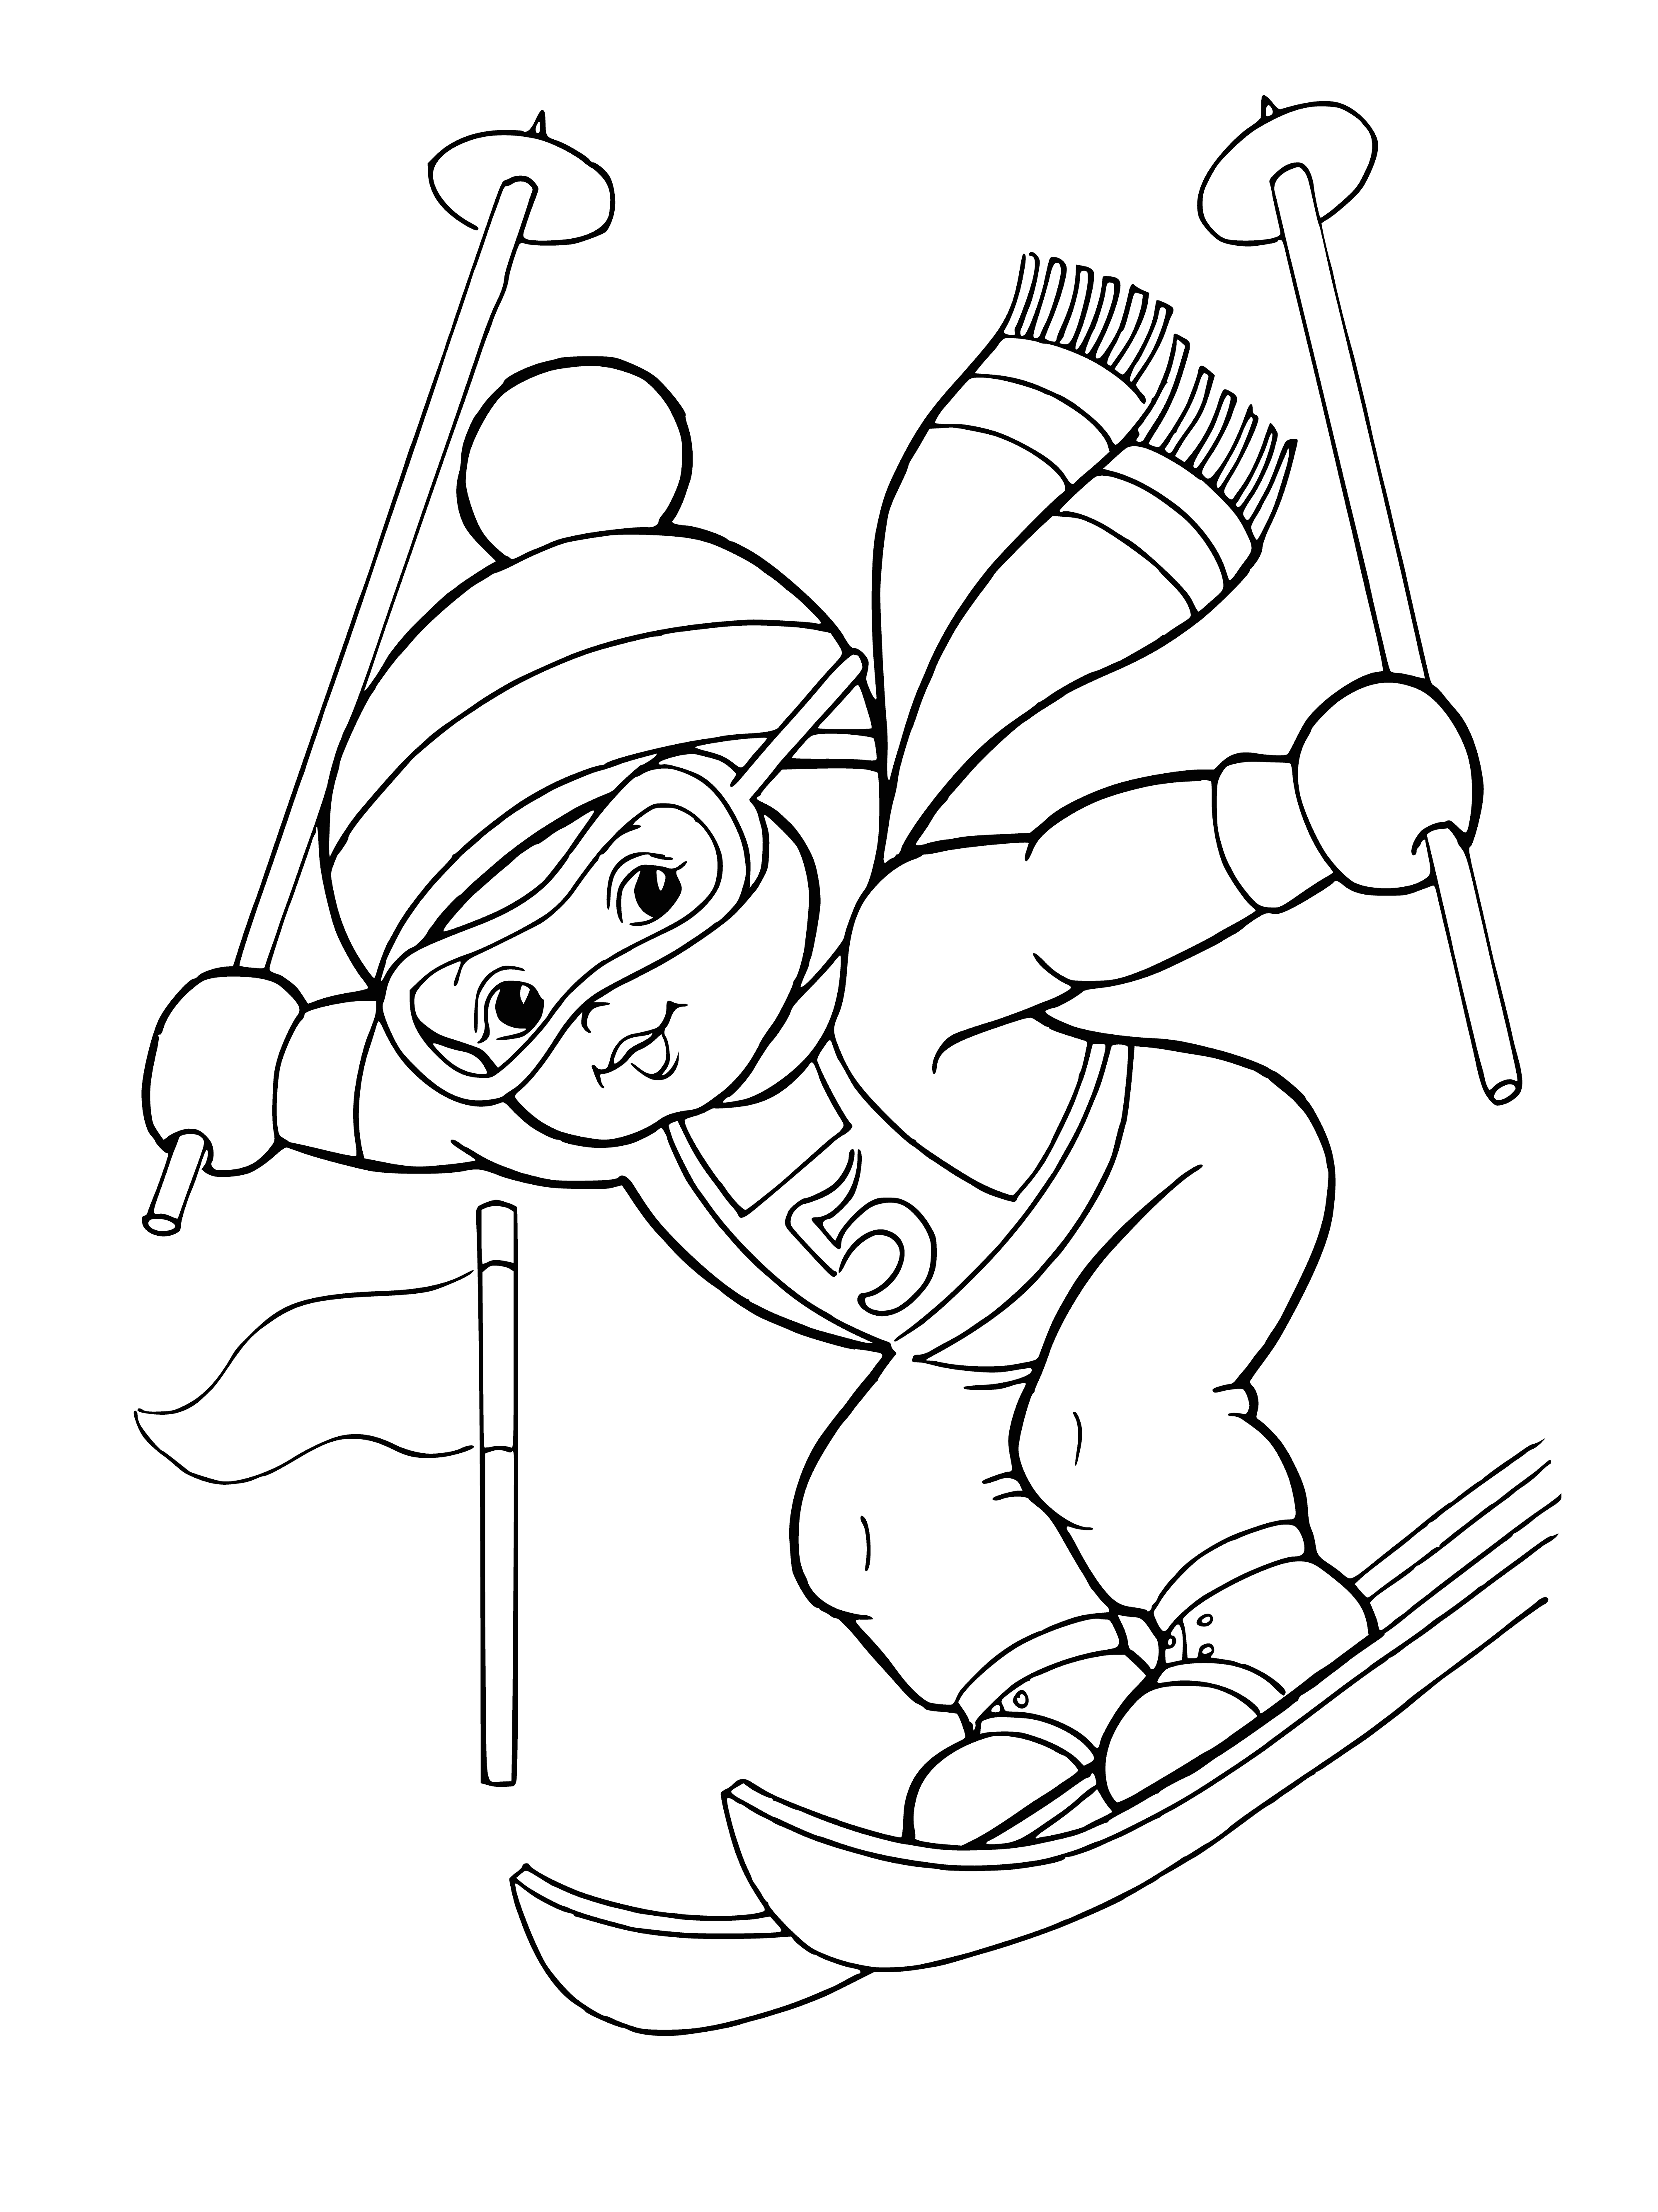 coloring page: People skiing down snowy hill, poles and warm coats/hats enabling them to stay warm.